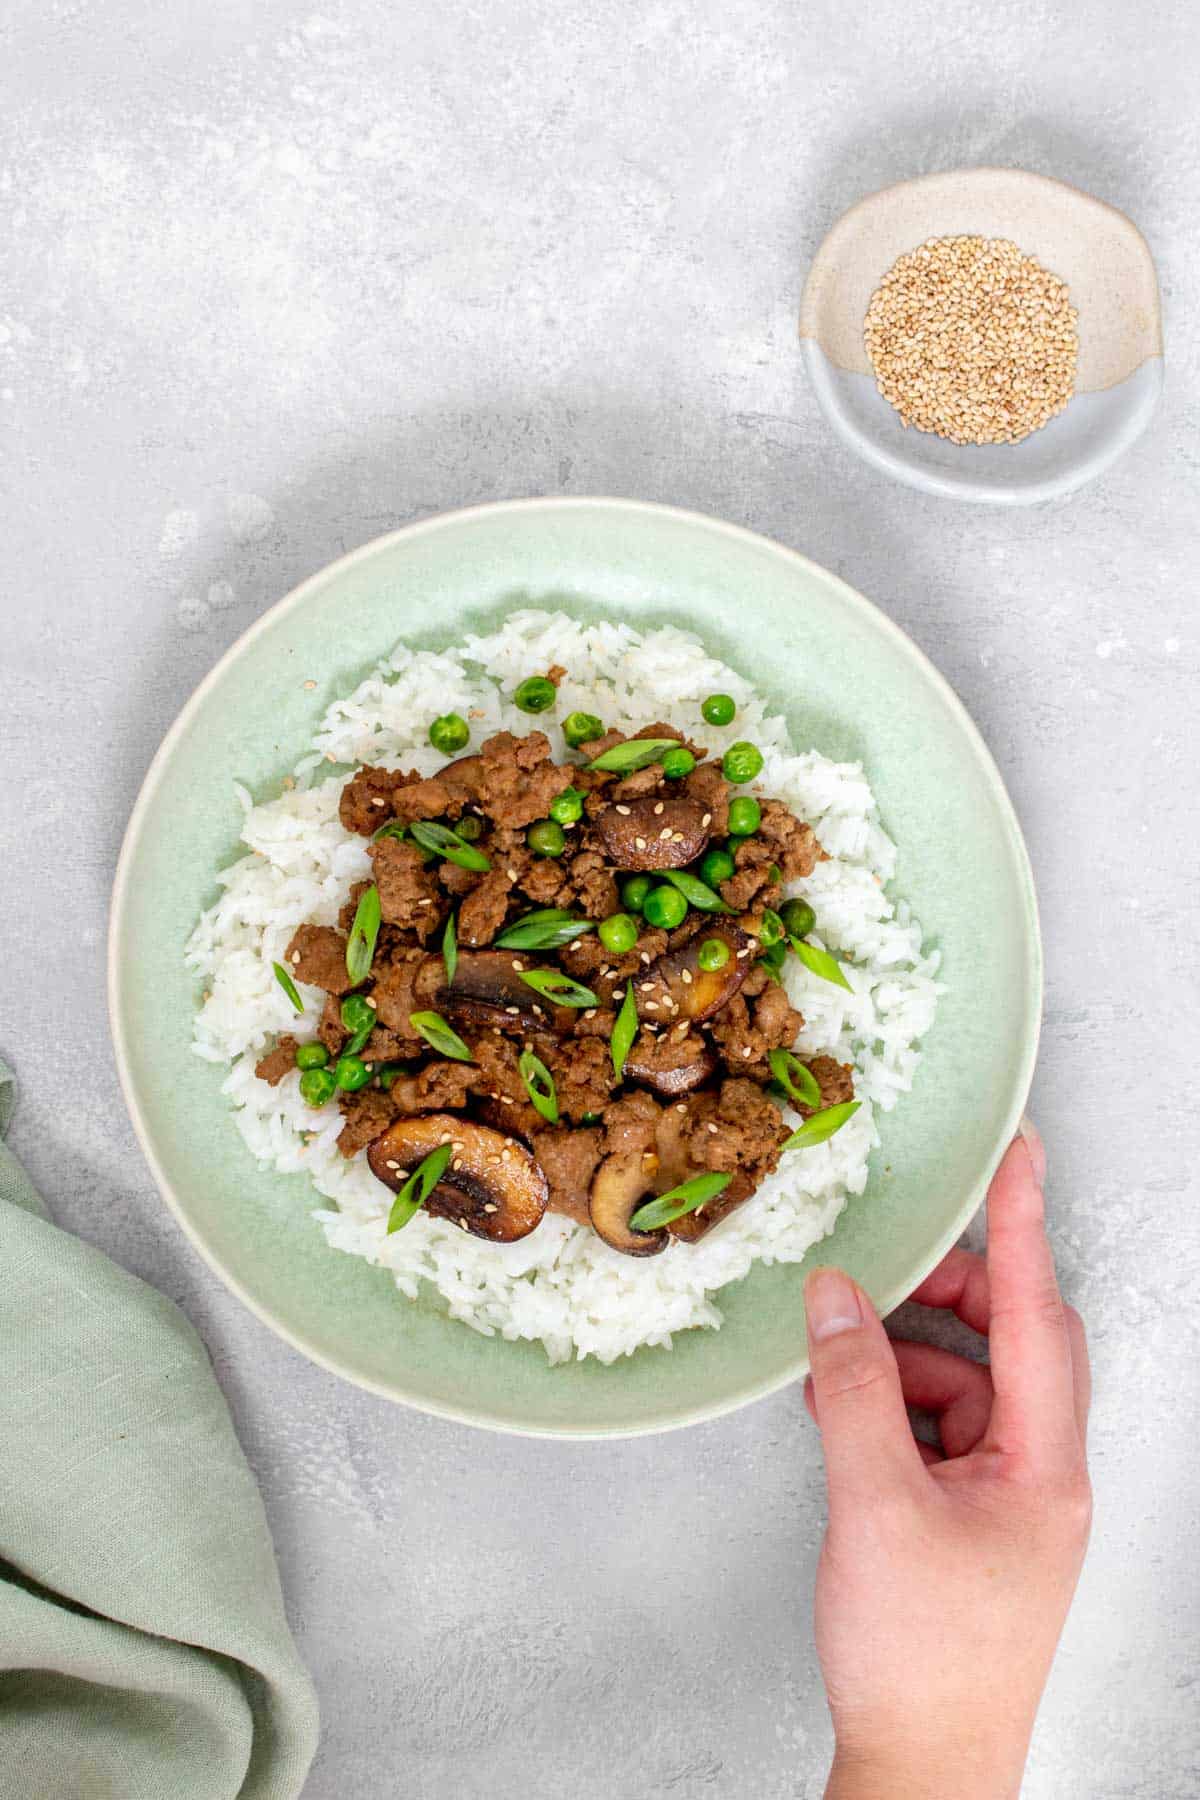 A plate of teriyaki ground pork stir fry over rice with a hand holding the plate.